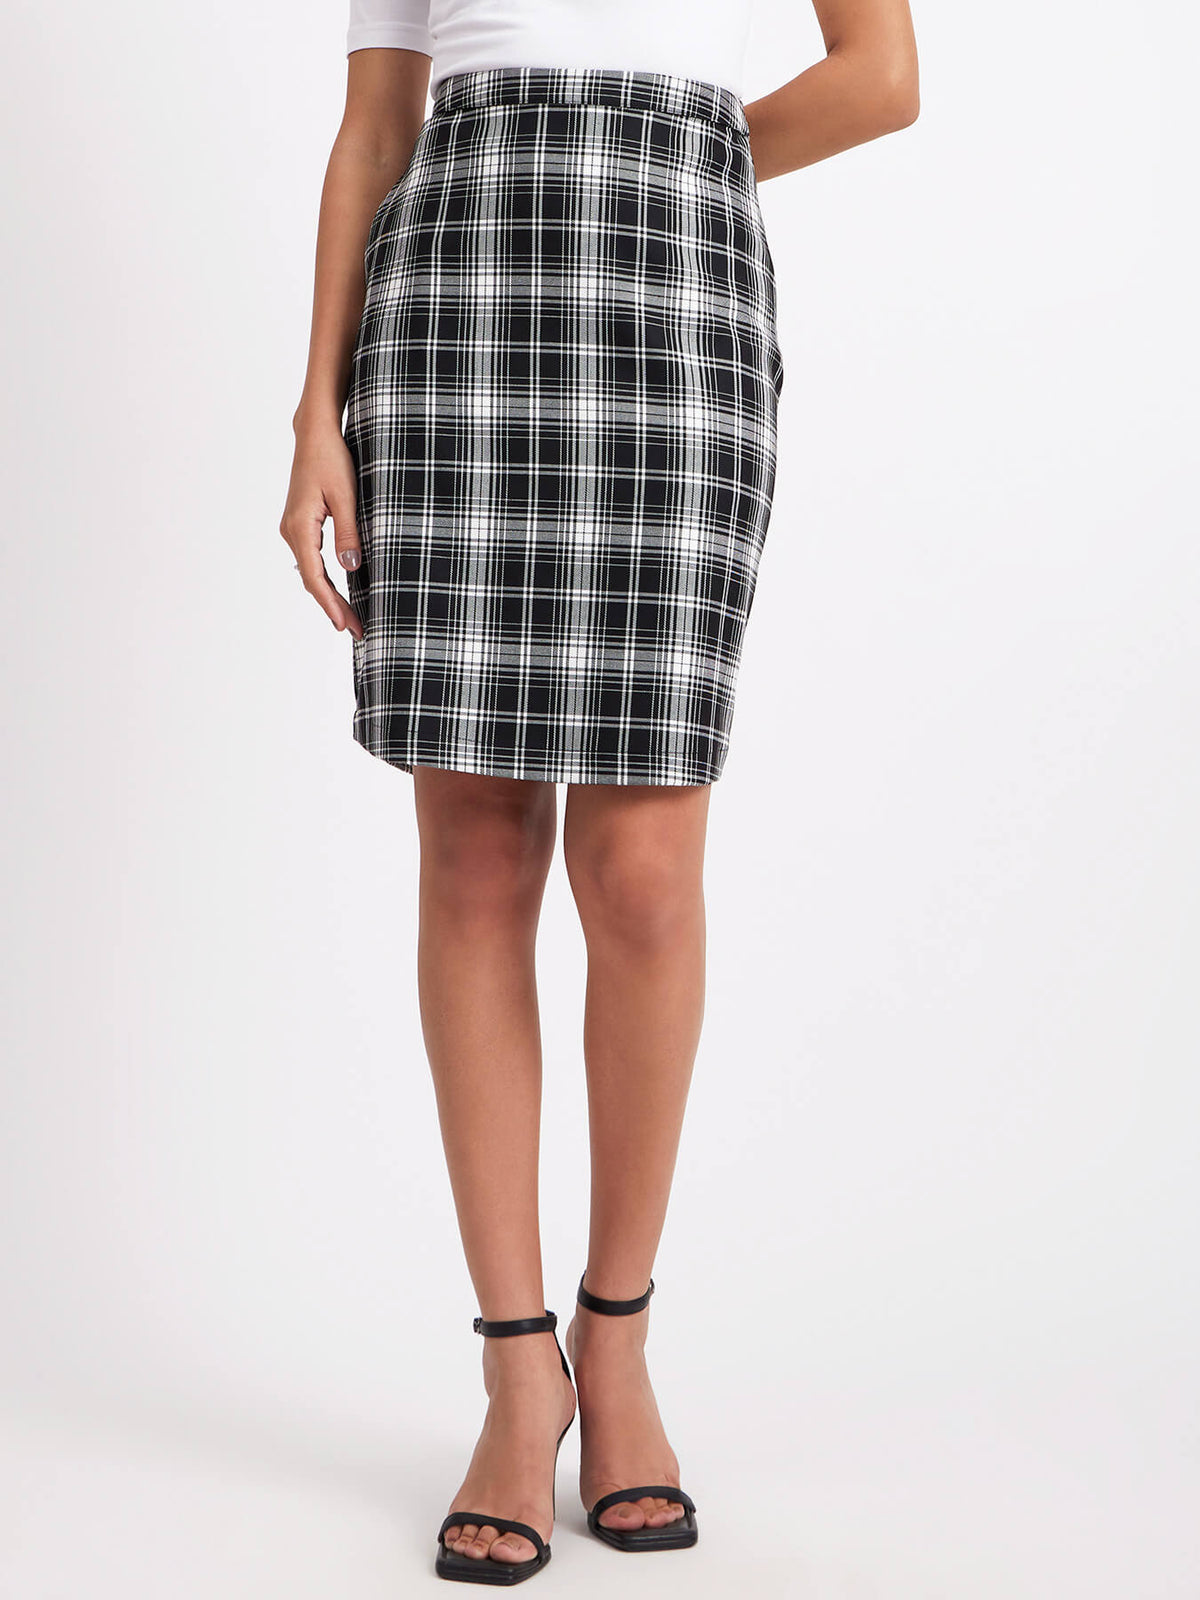 Checkered Straight Fit Skirt - Black And White